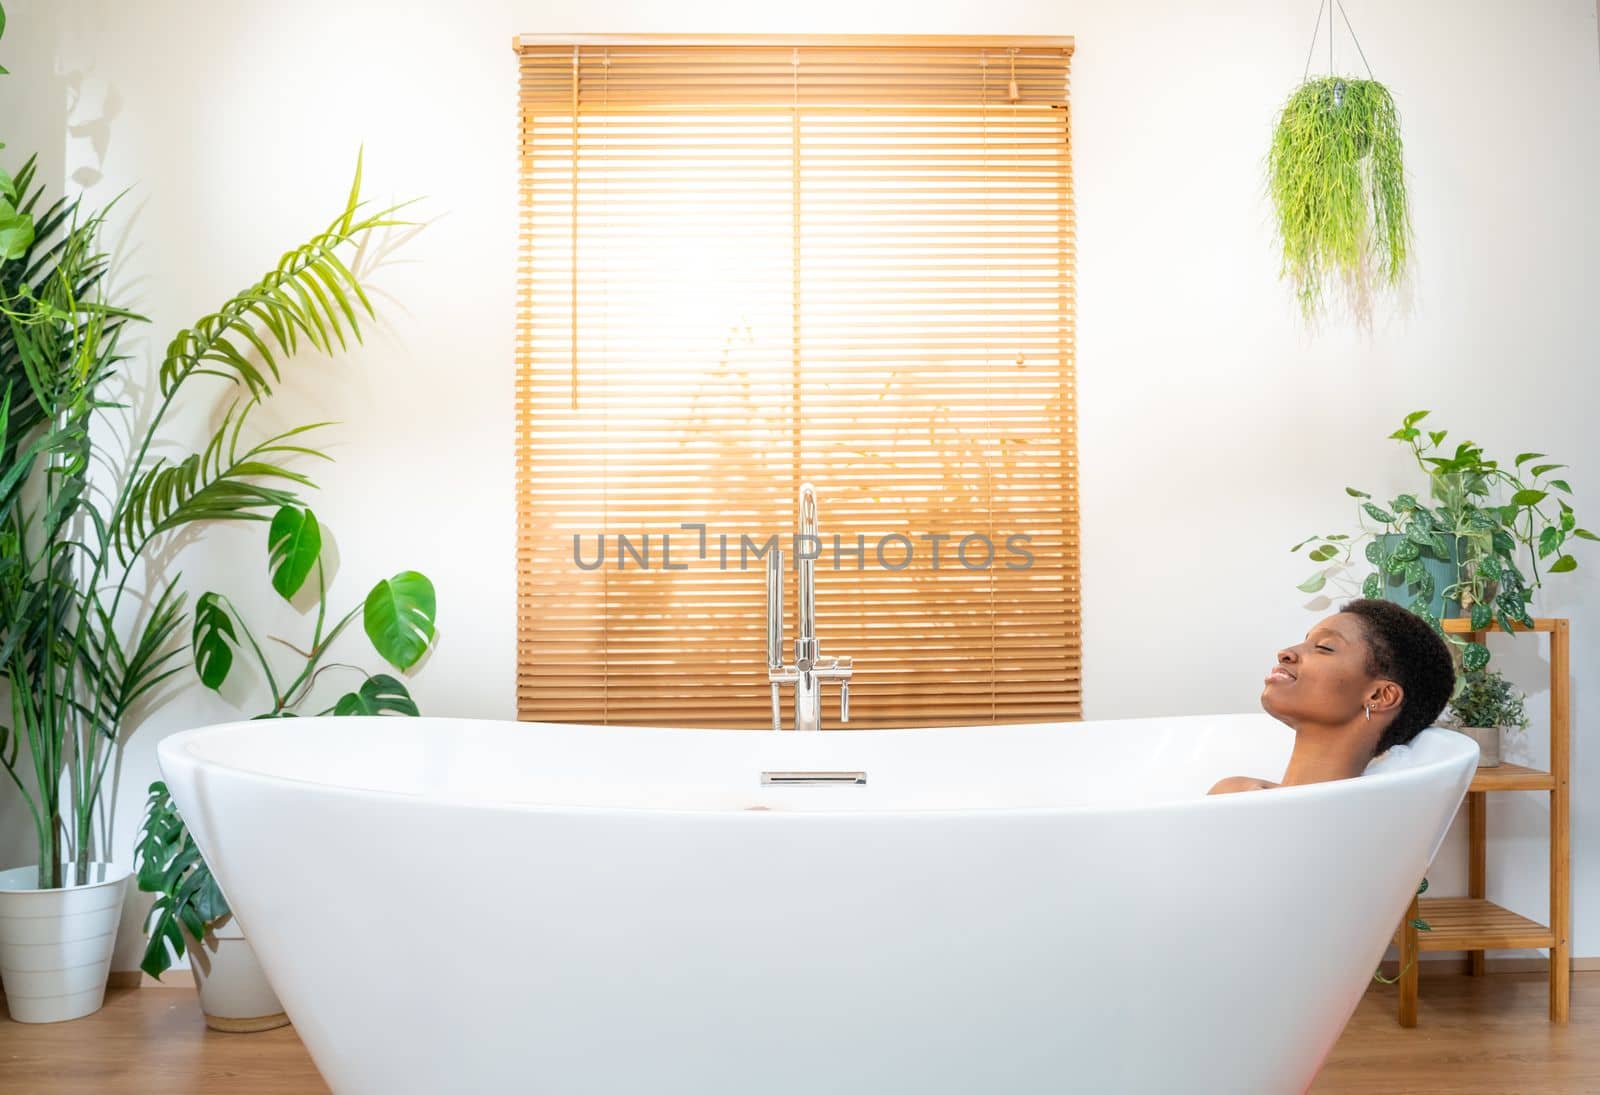 Attractive woman relaxing in foam bath in beautiful bathroom with plants at home during a sunny morning routine. Rest, calm, pleasure, happiness and wellbeing concept. High quality photo